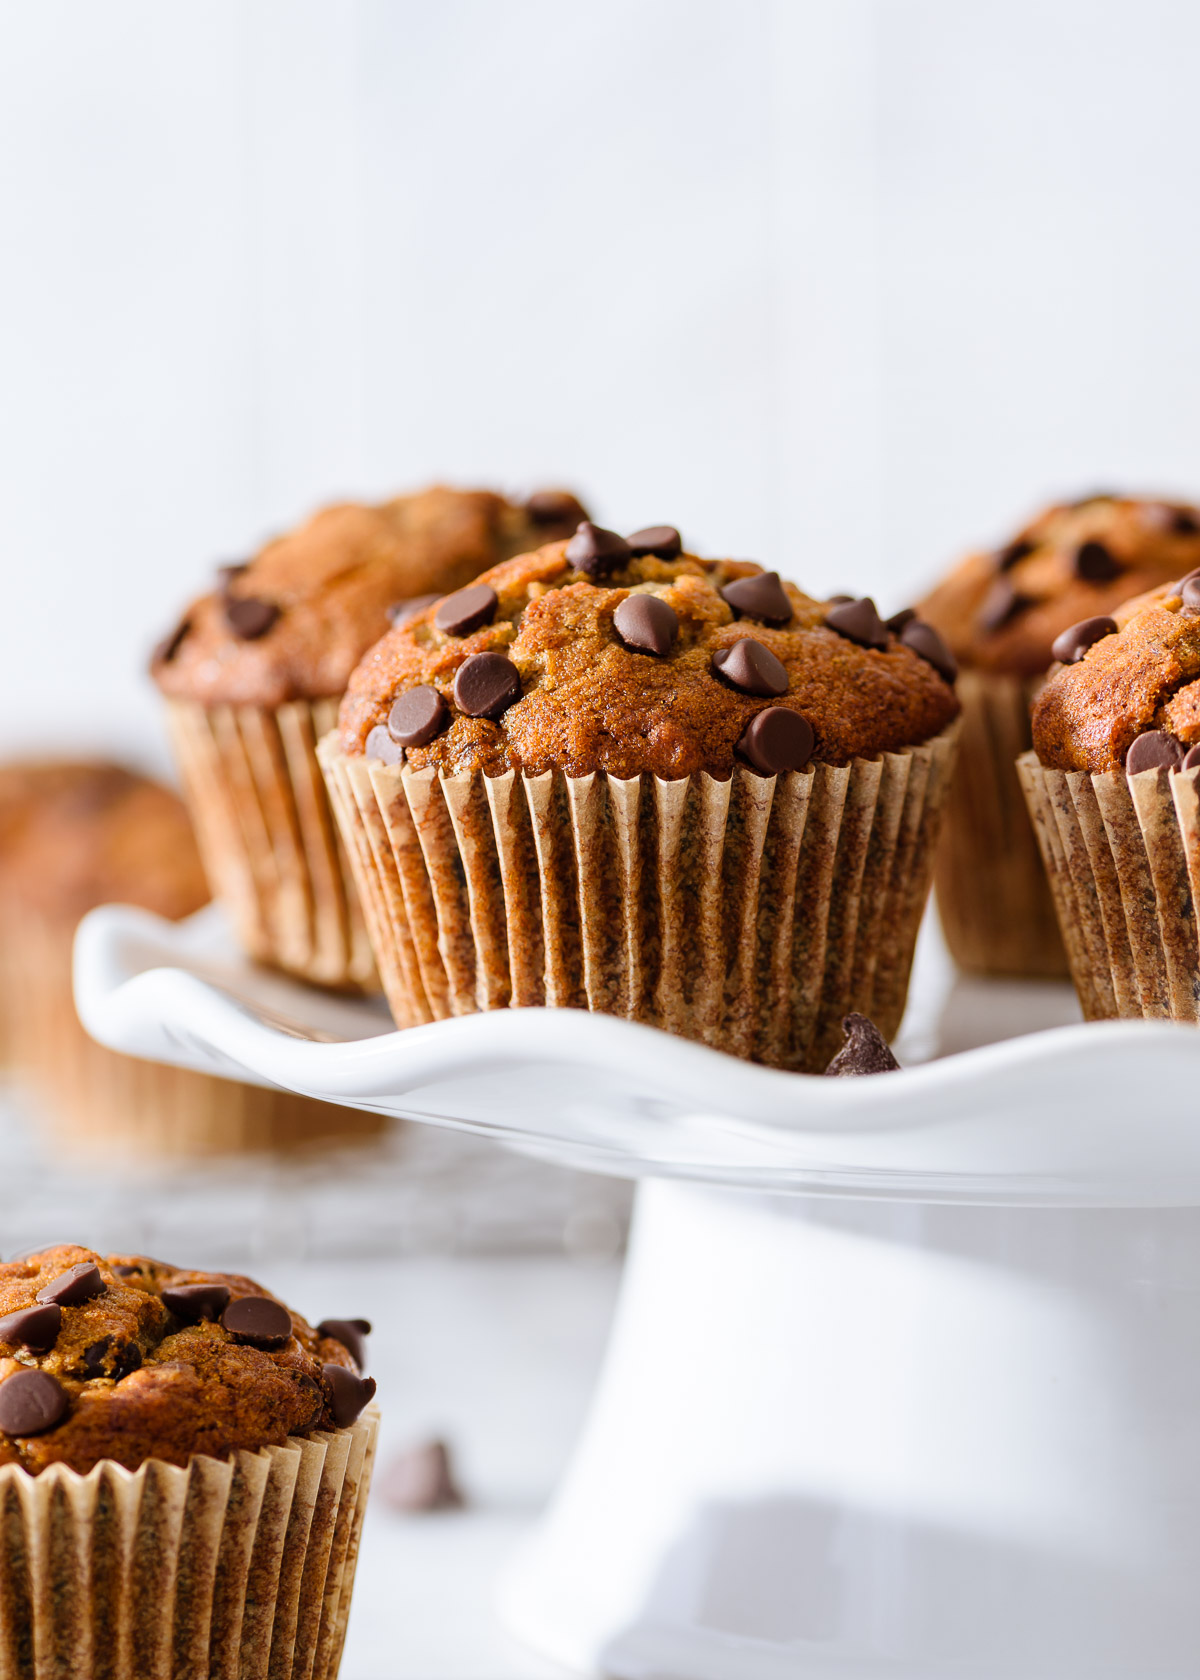 Chocolate chip banana muffins on a white cake stand with a light background.